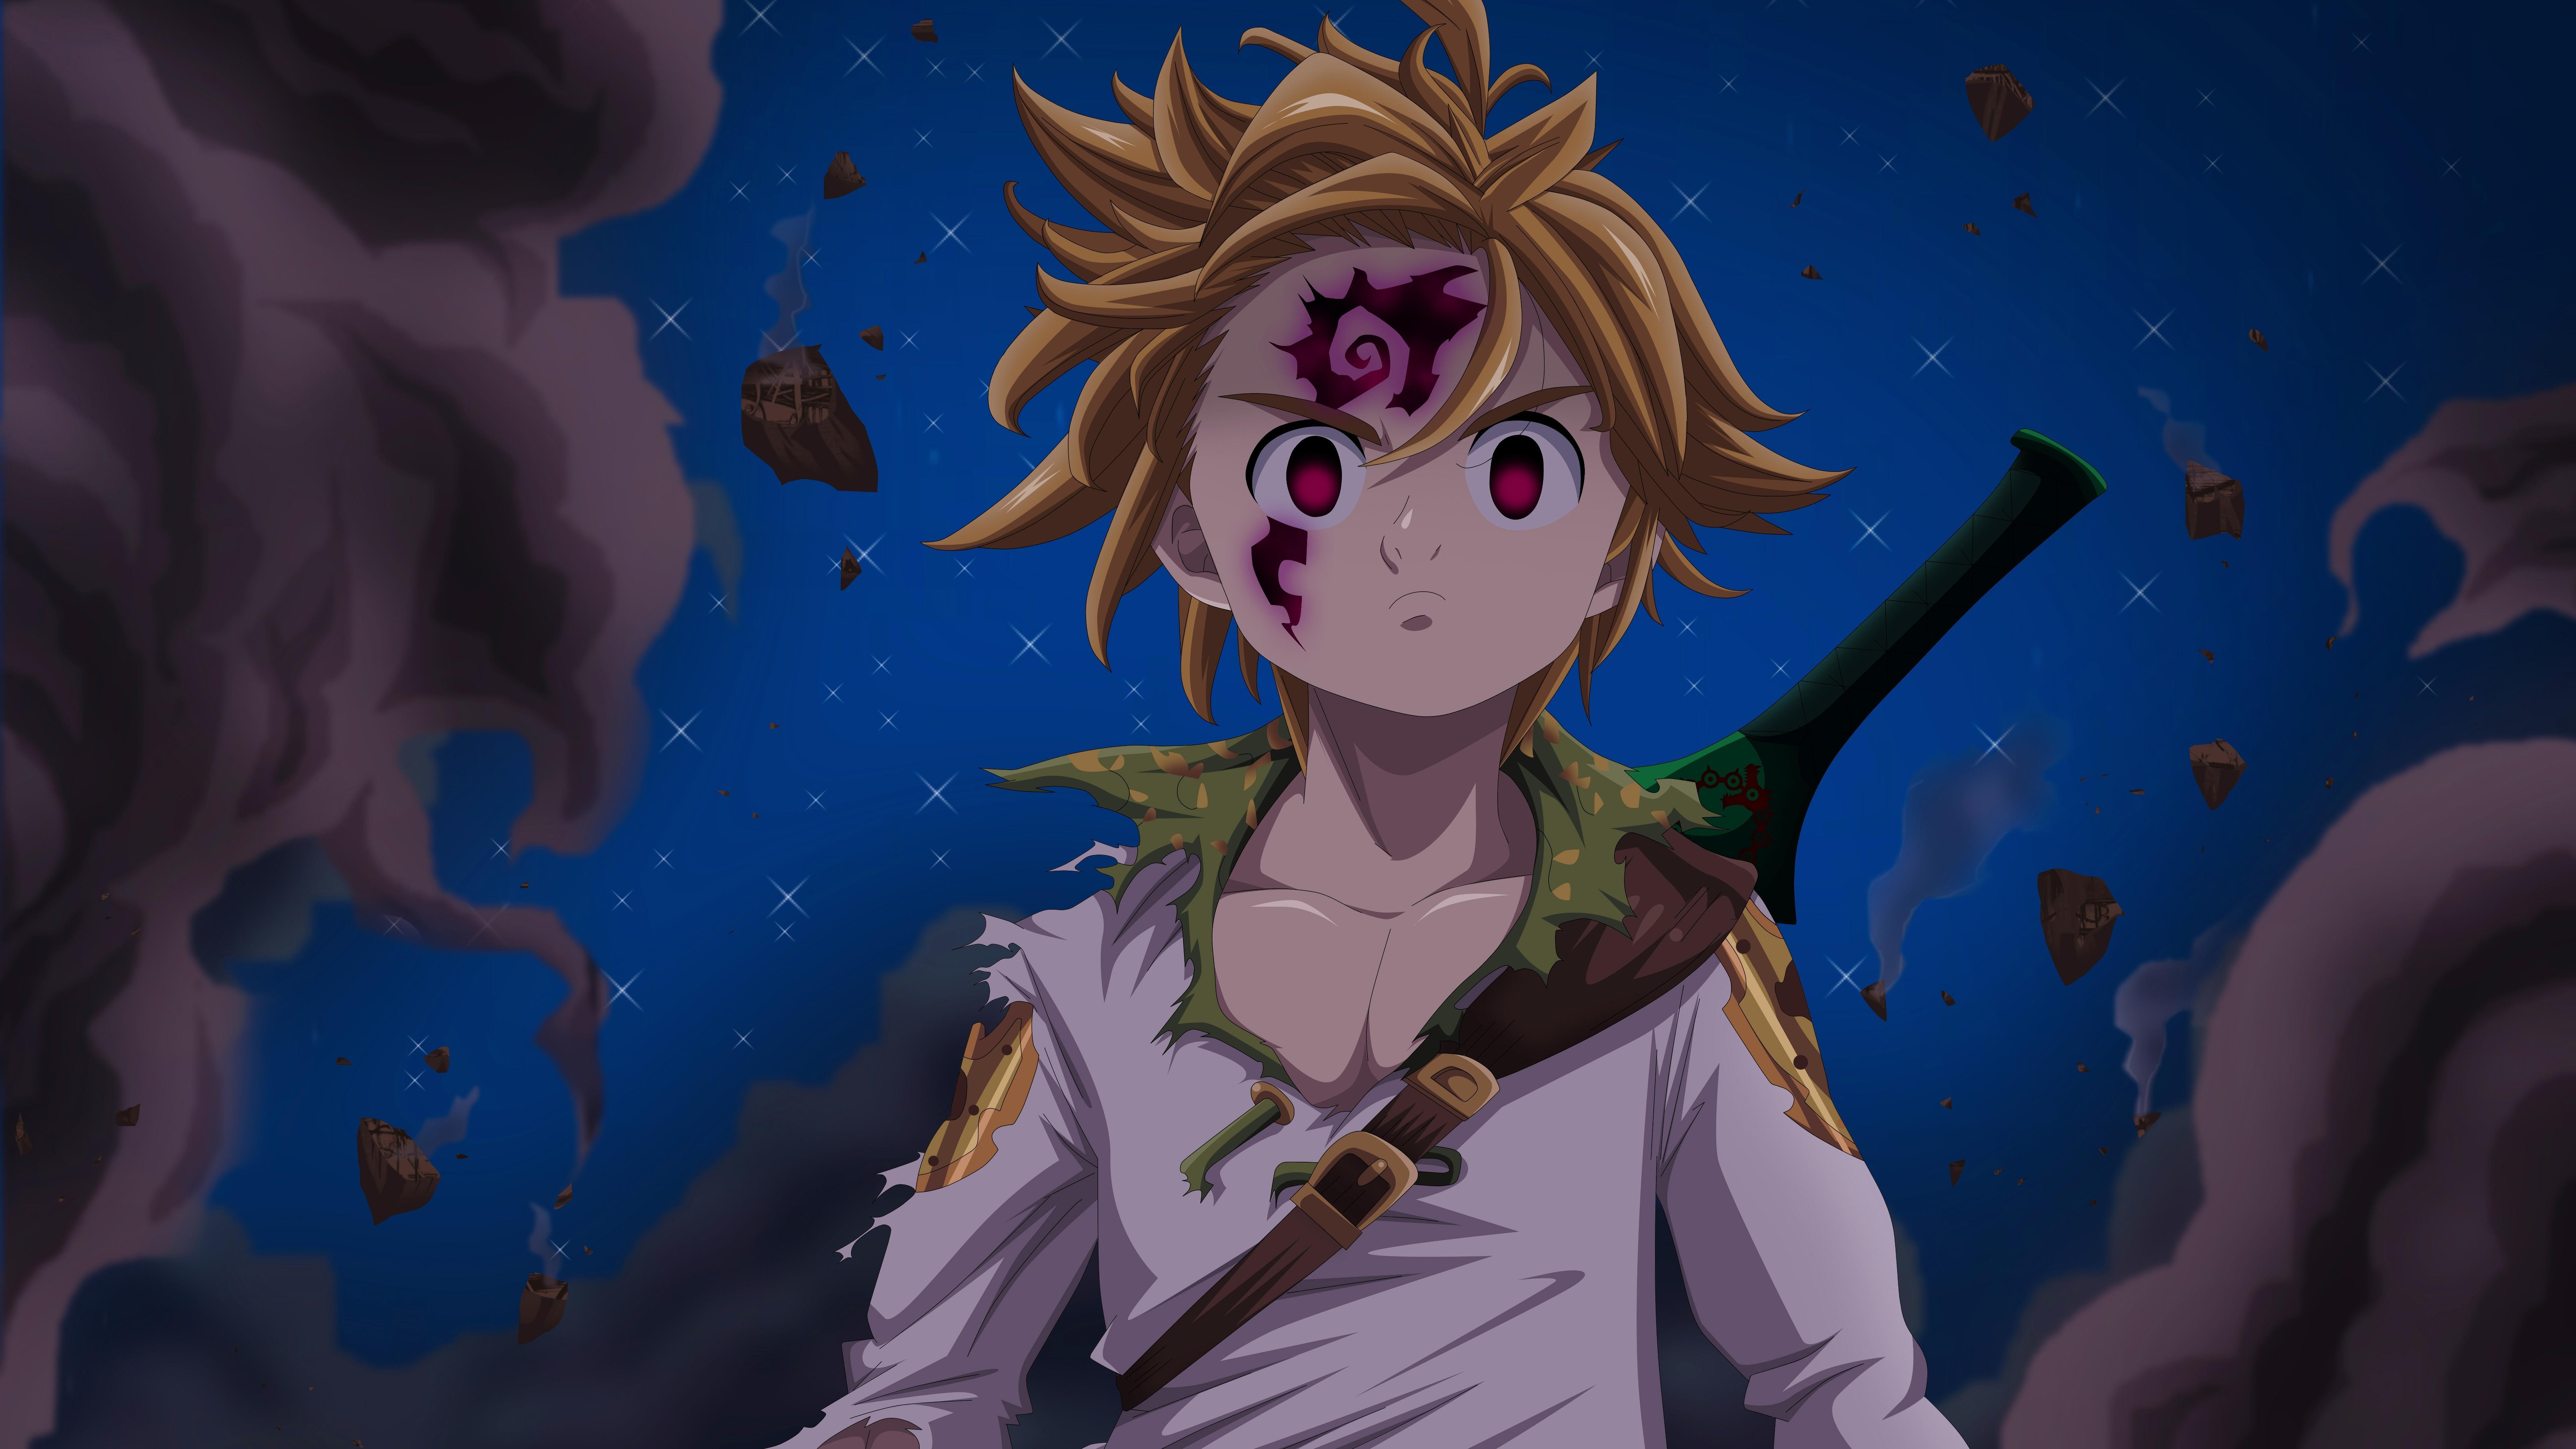 Meliodas From Demon The Seven Deadly Sins Macbook Pro Retina Wallpaper, HD Anime 4K Wallpaper, Image, Photo and Background